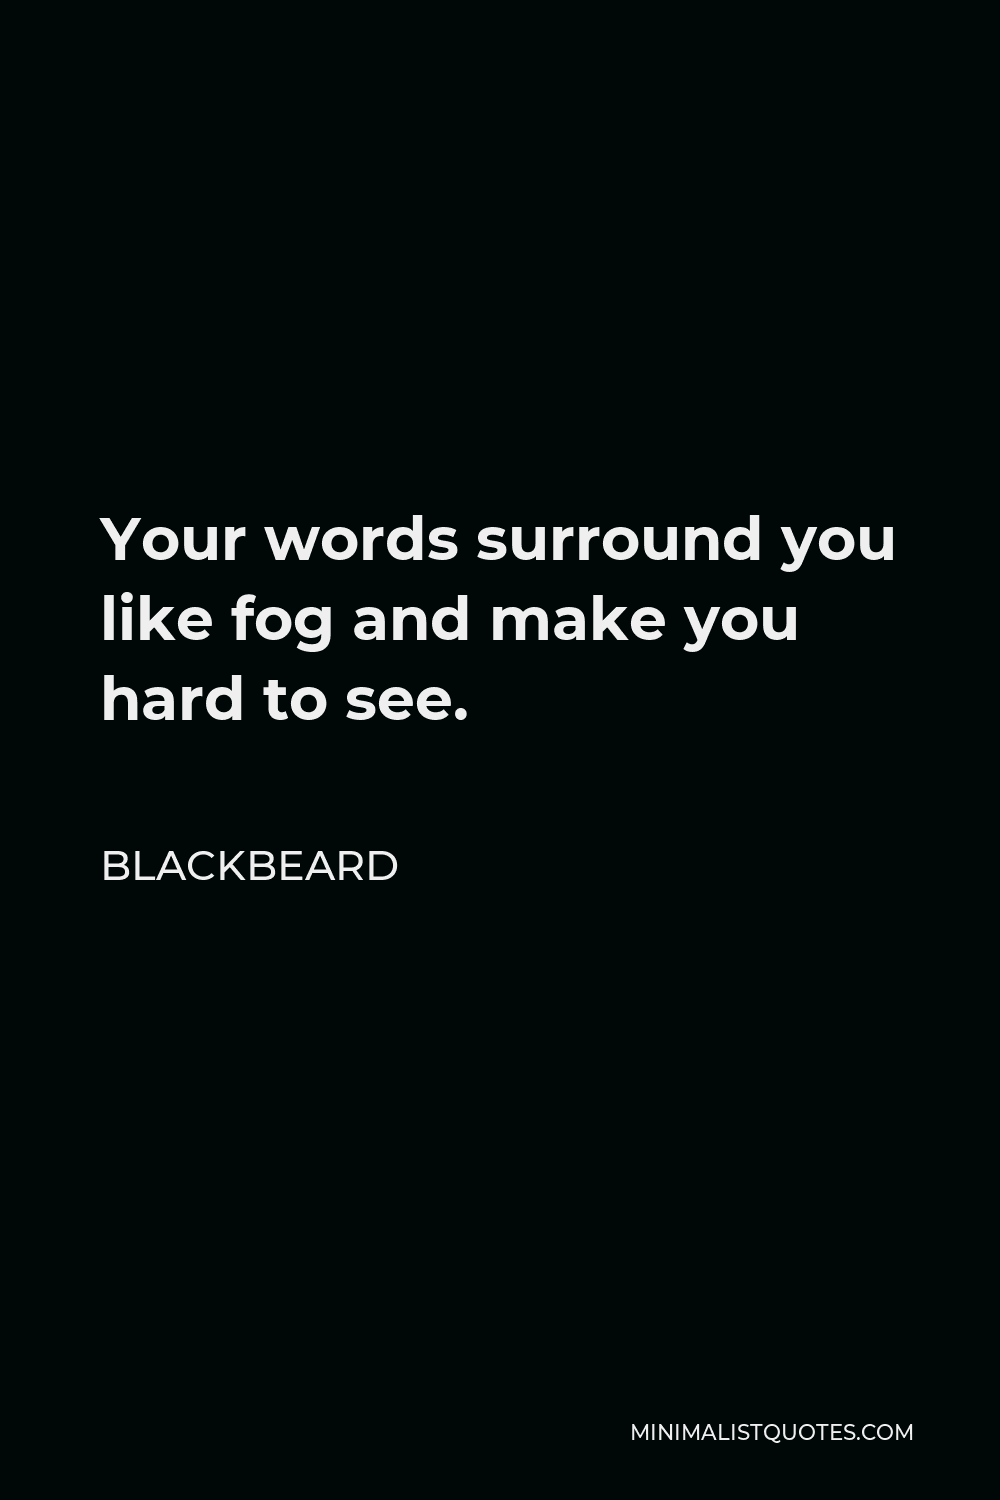 Blackbeard Quote - Your words surround you like fog and make you hard to see.